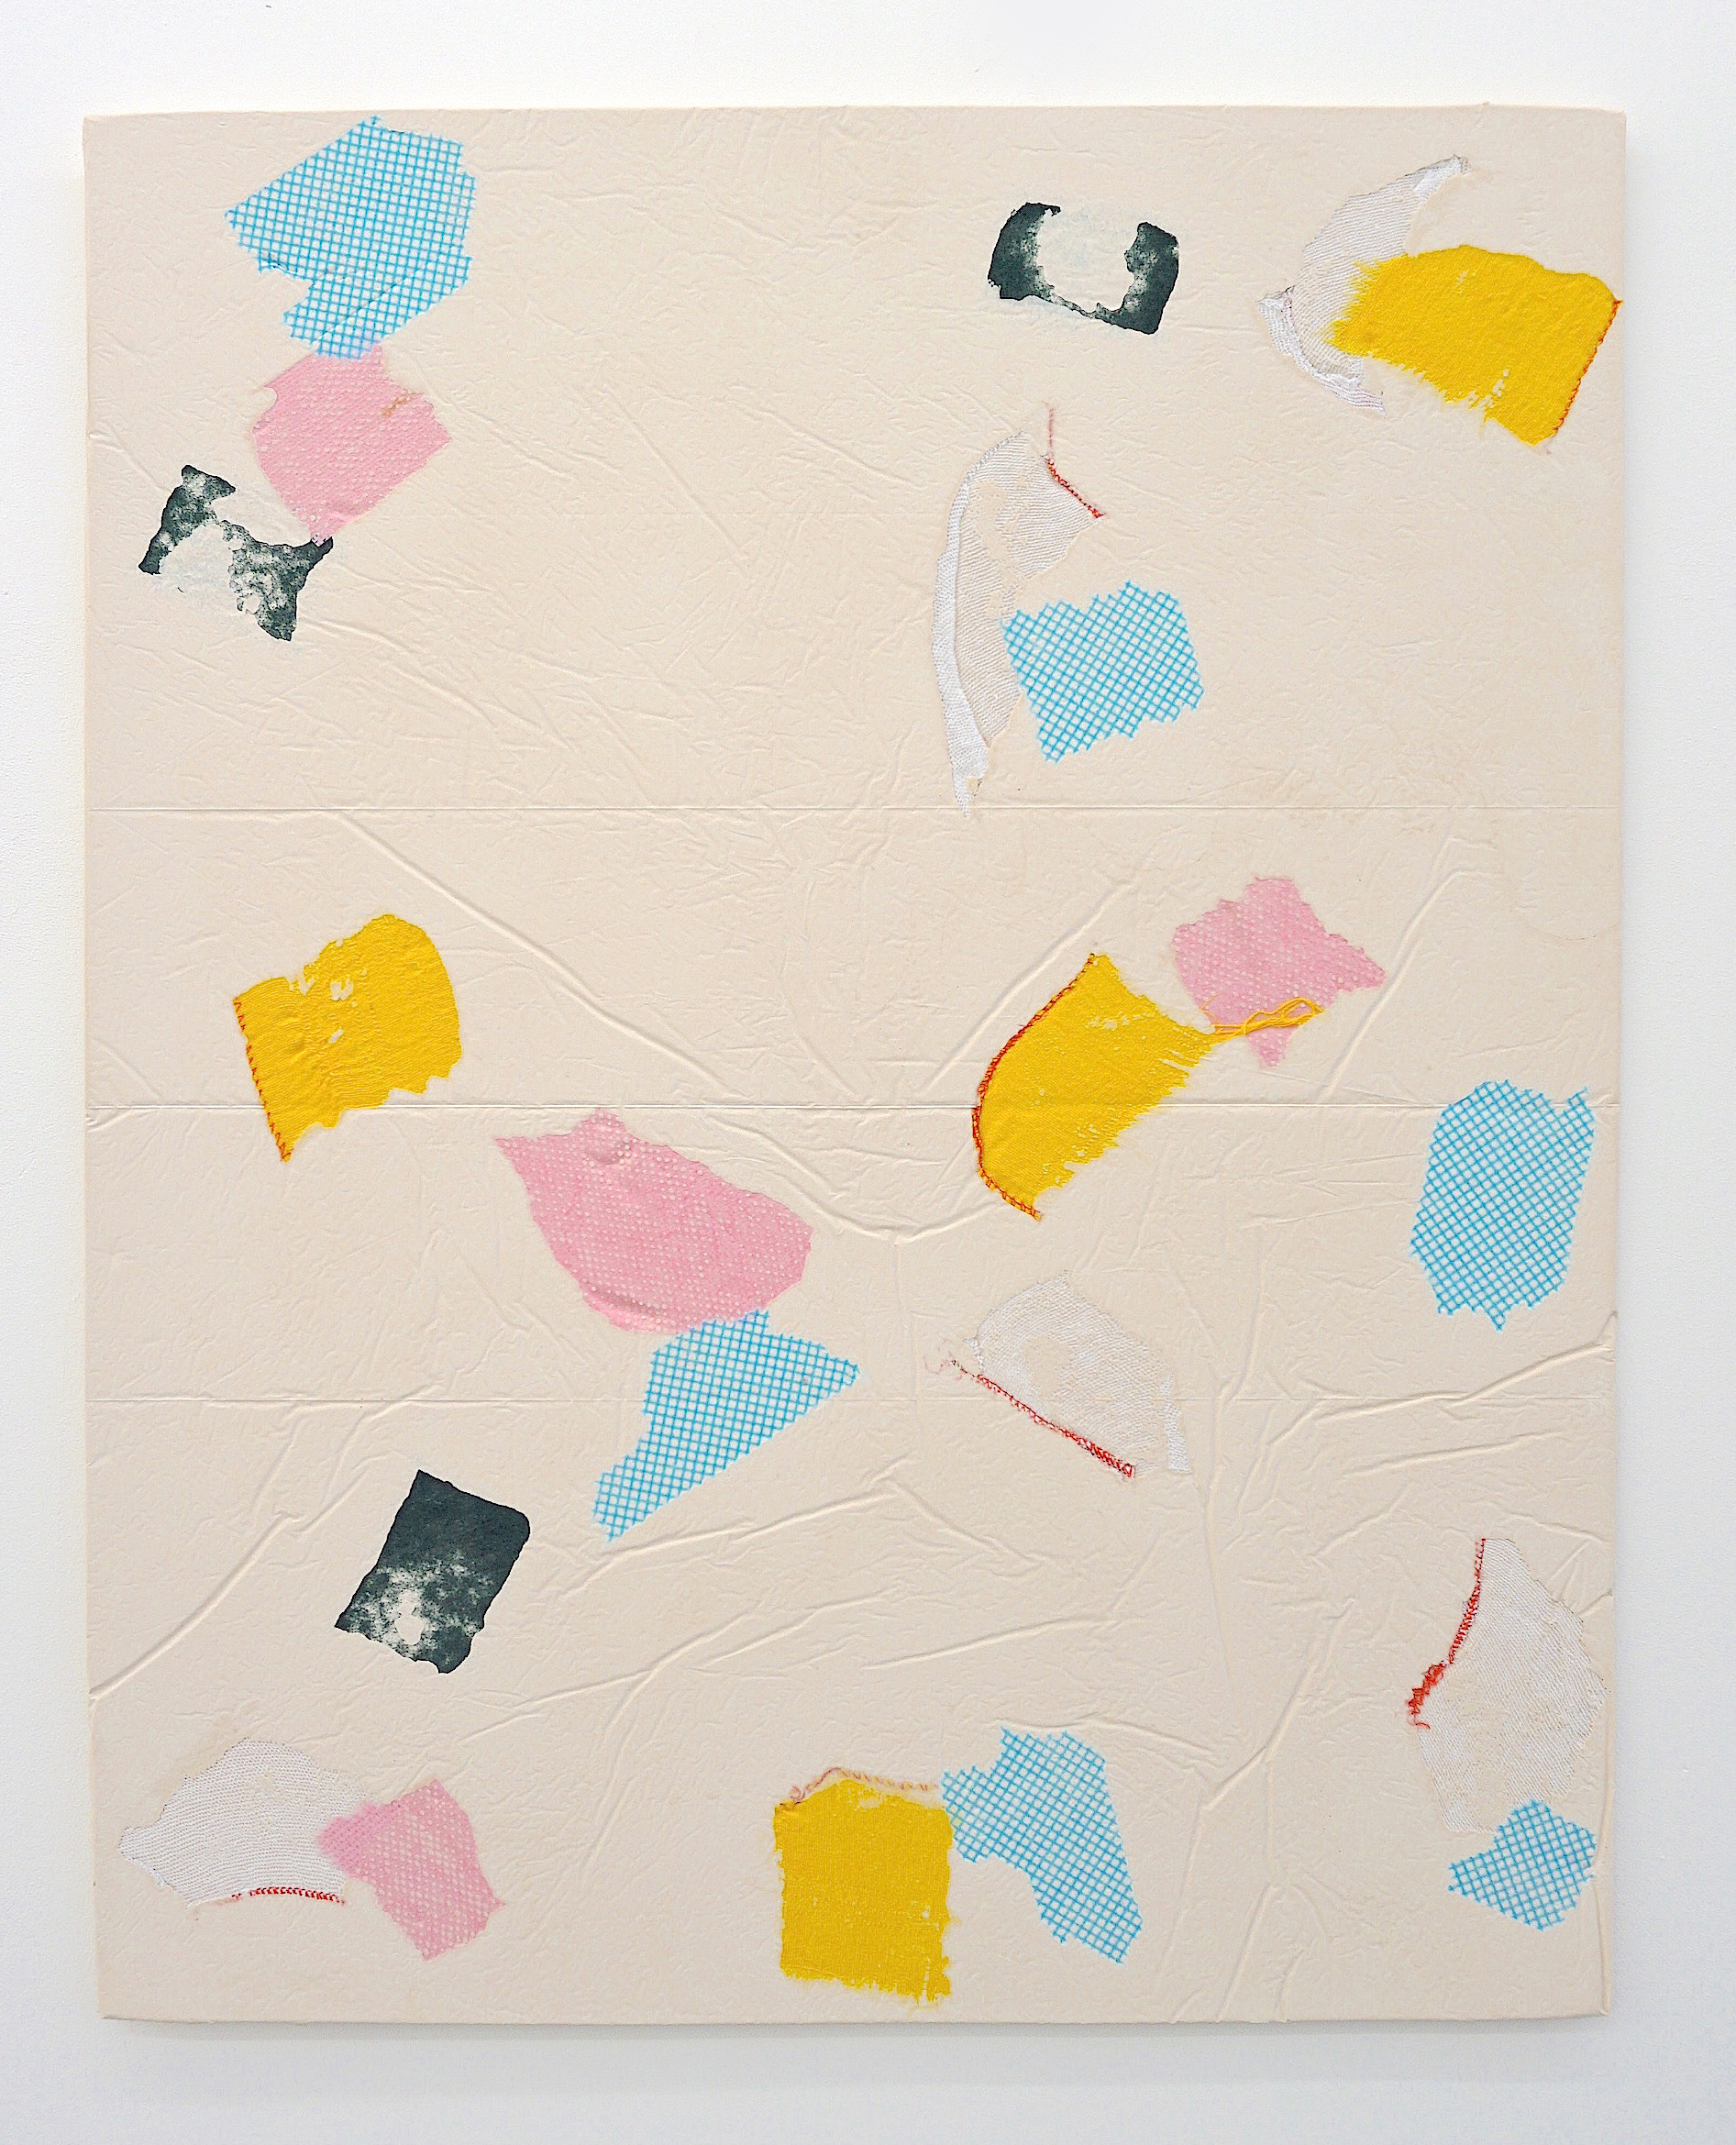 Domestic Bliss (yellow, blue, green, pink) | Composite, Mixed Media | 100 x 80 cm 